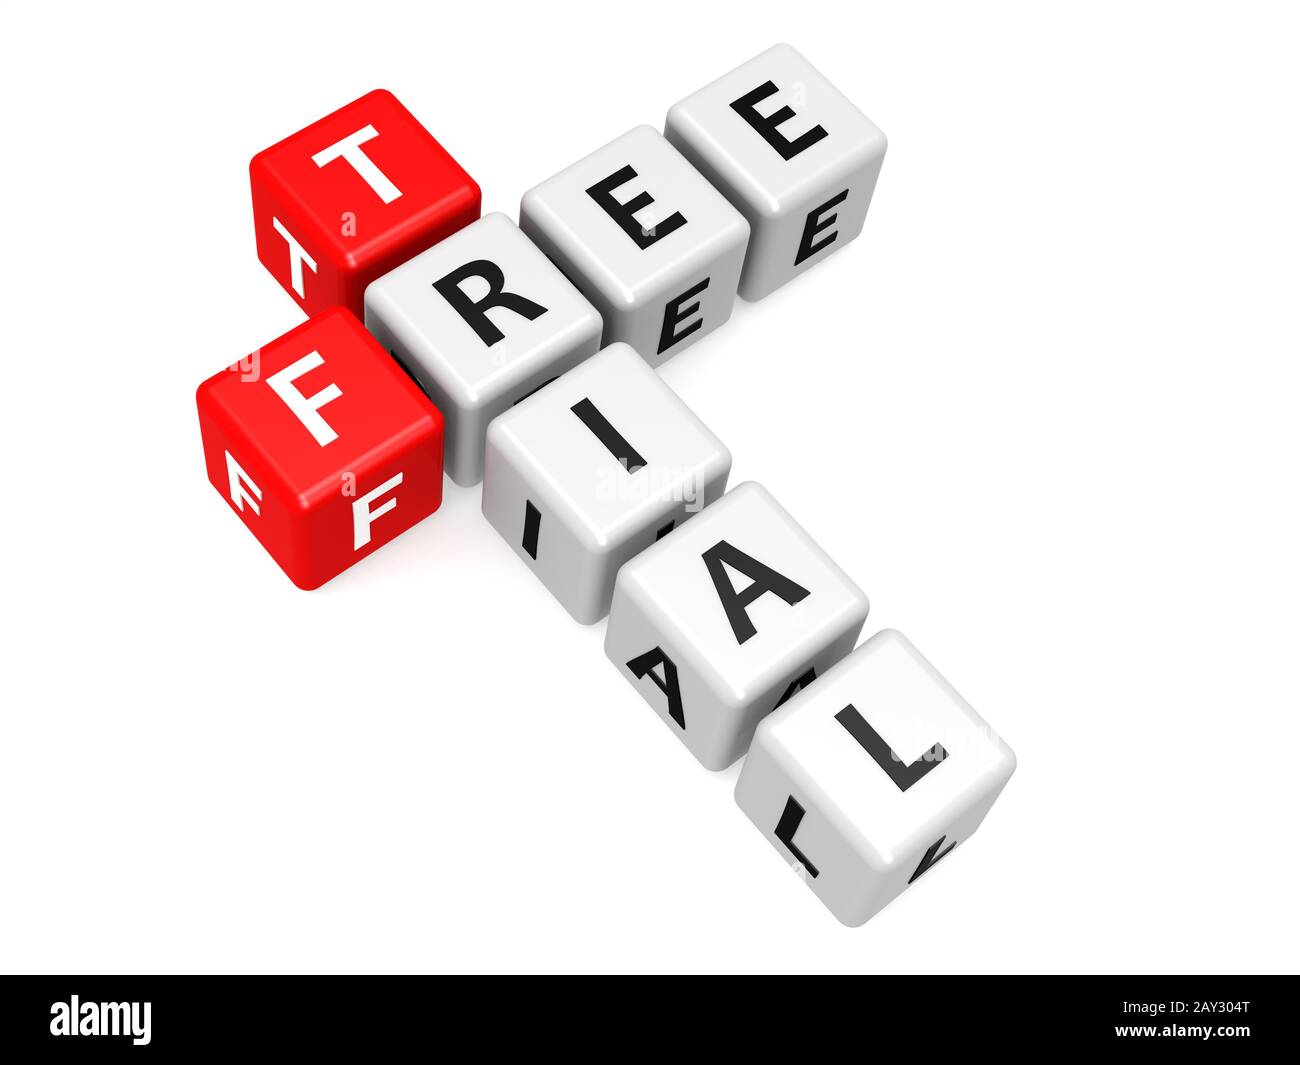 Trial alamy free More sales